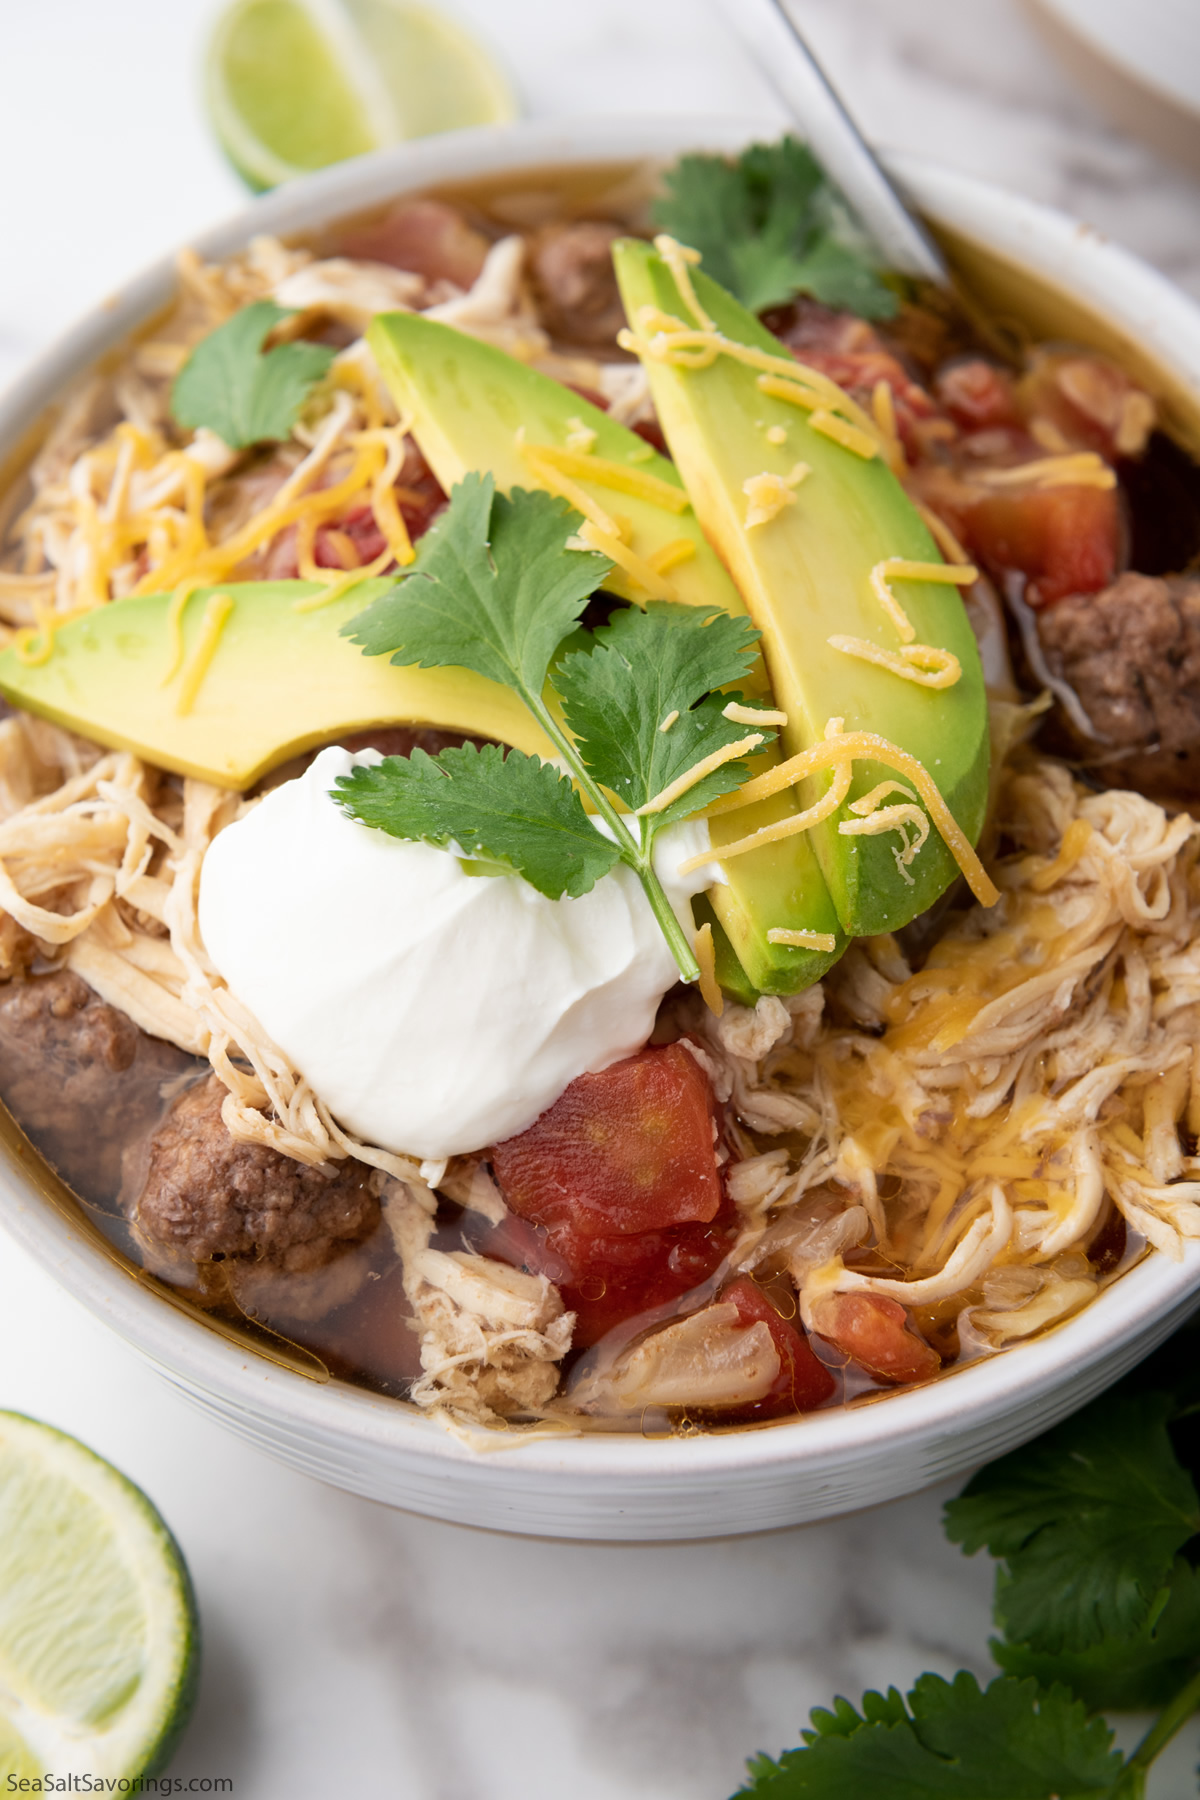 Taco Soup garnished with avocado, lime, cilantro, sour cream, and shredded cheese, served hot